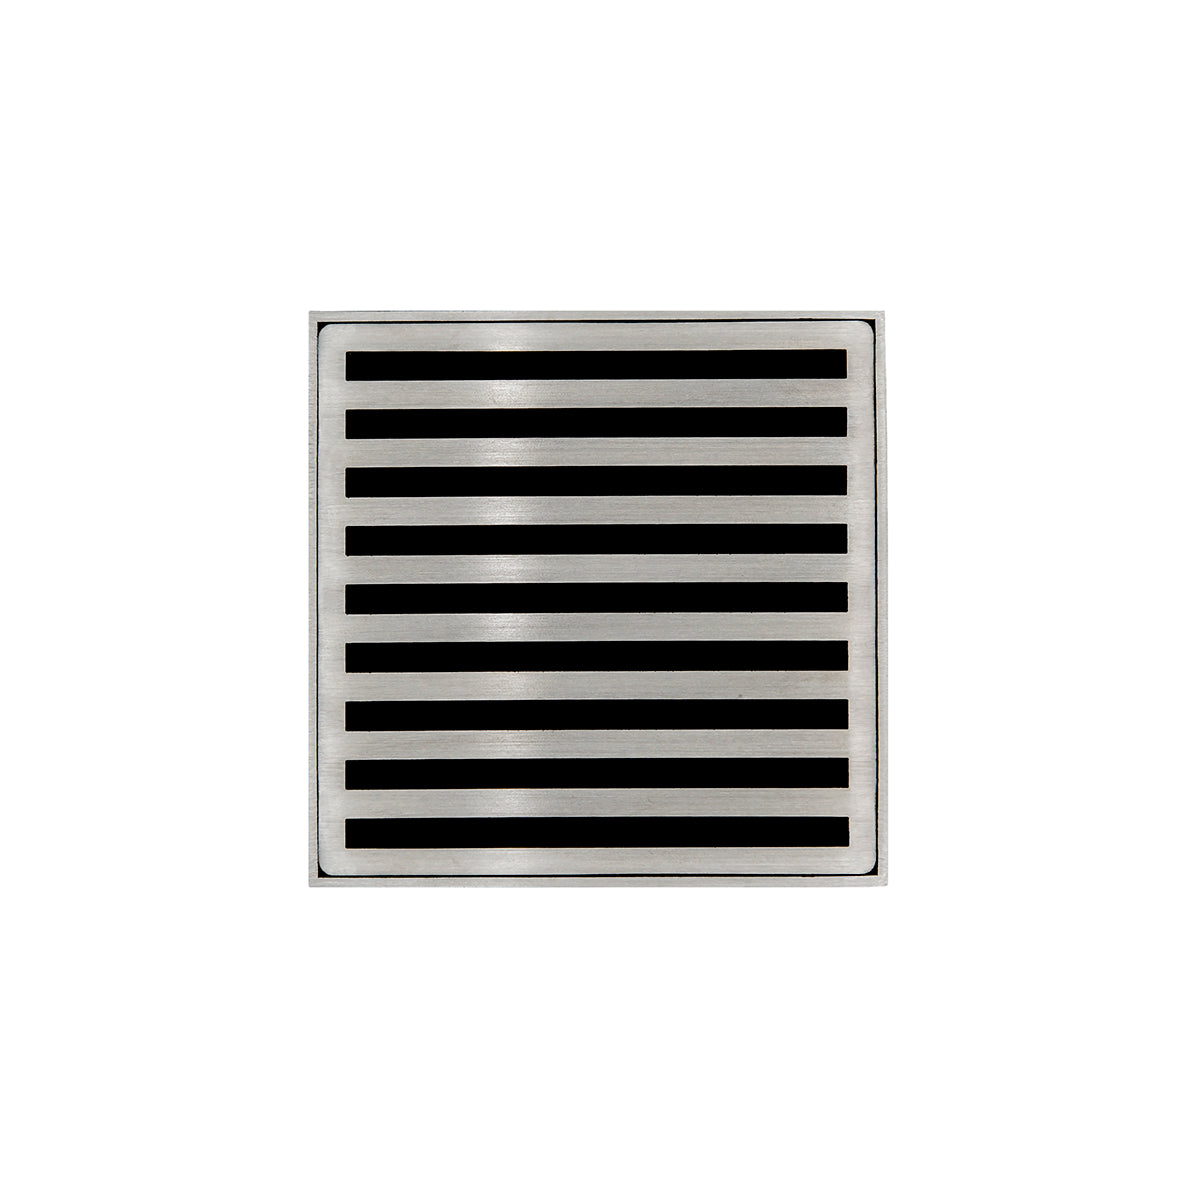 Infinity Drain 4" x 4" NDB 4 Premium Center Drain Kit with Lines Pattern Decorative Plate with ABS Bonded Flange Drain Body, 2", 3" and 4" Outlet